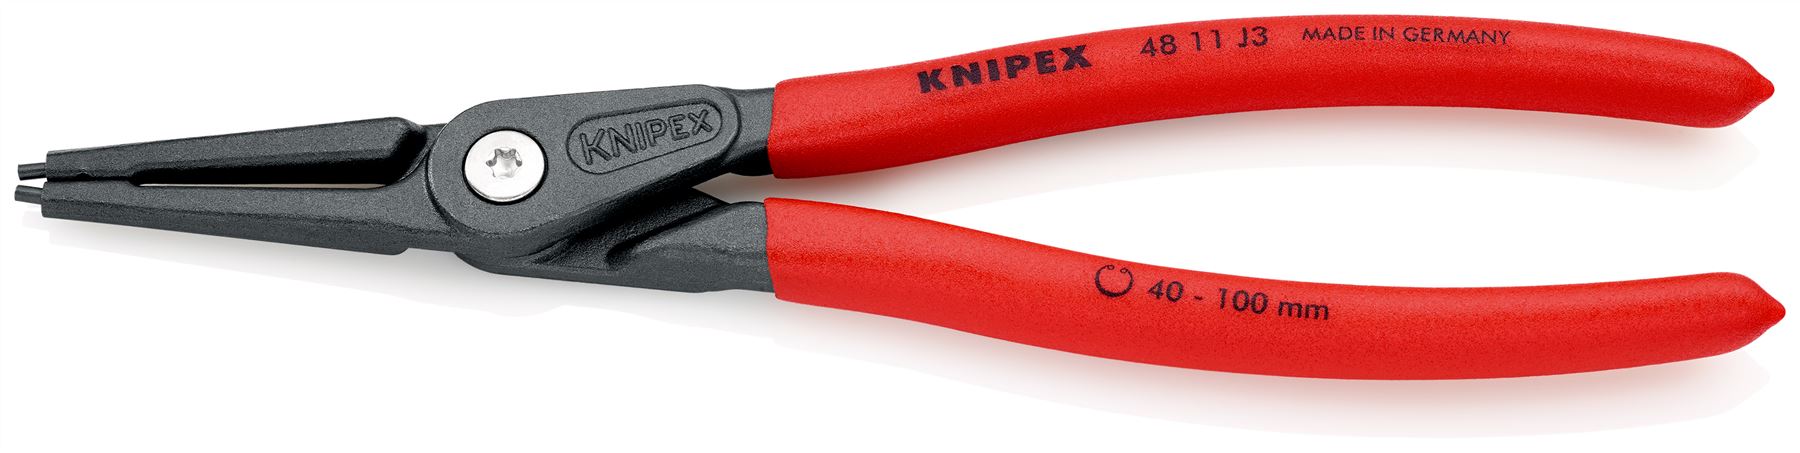 KNIPEX Precision Circlip Pliers for Internal Circlips in Bore Holes 225mm 2.3mm Diameter Tips 40 11 J3